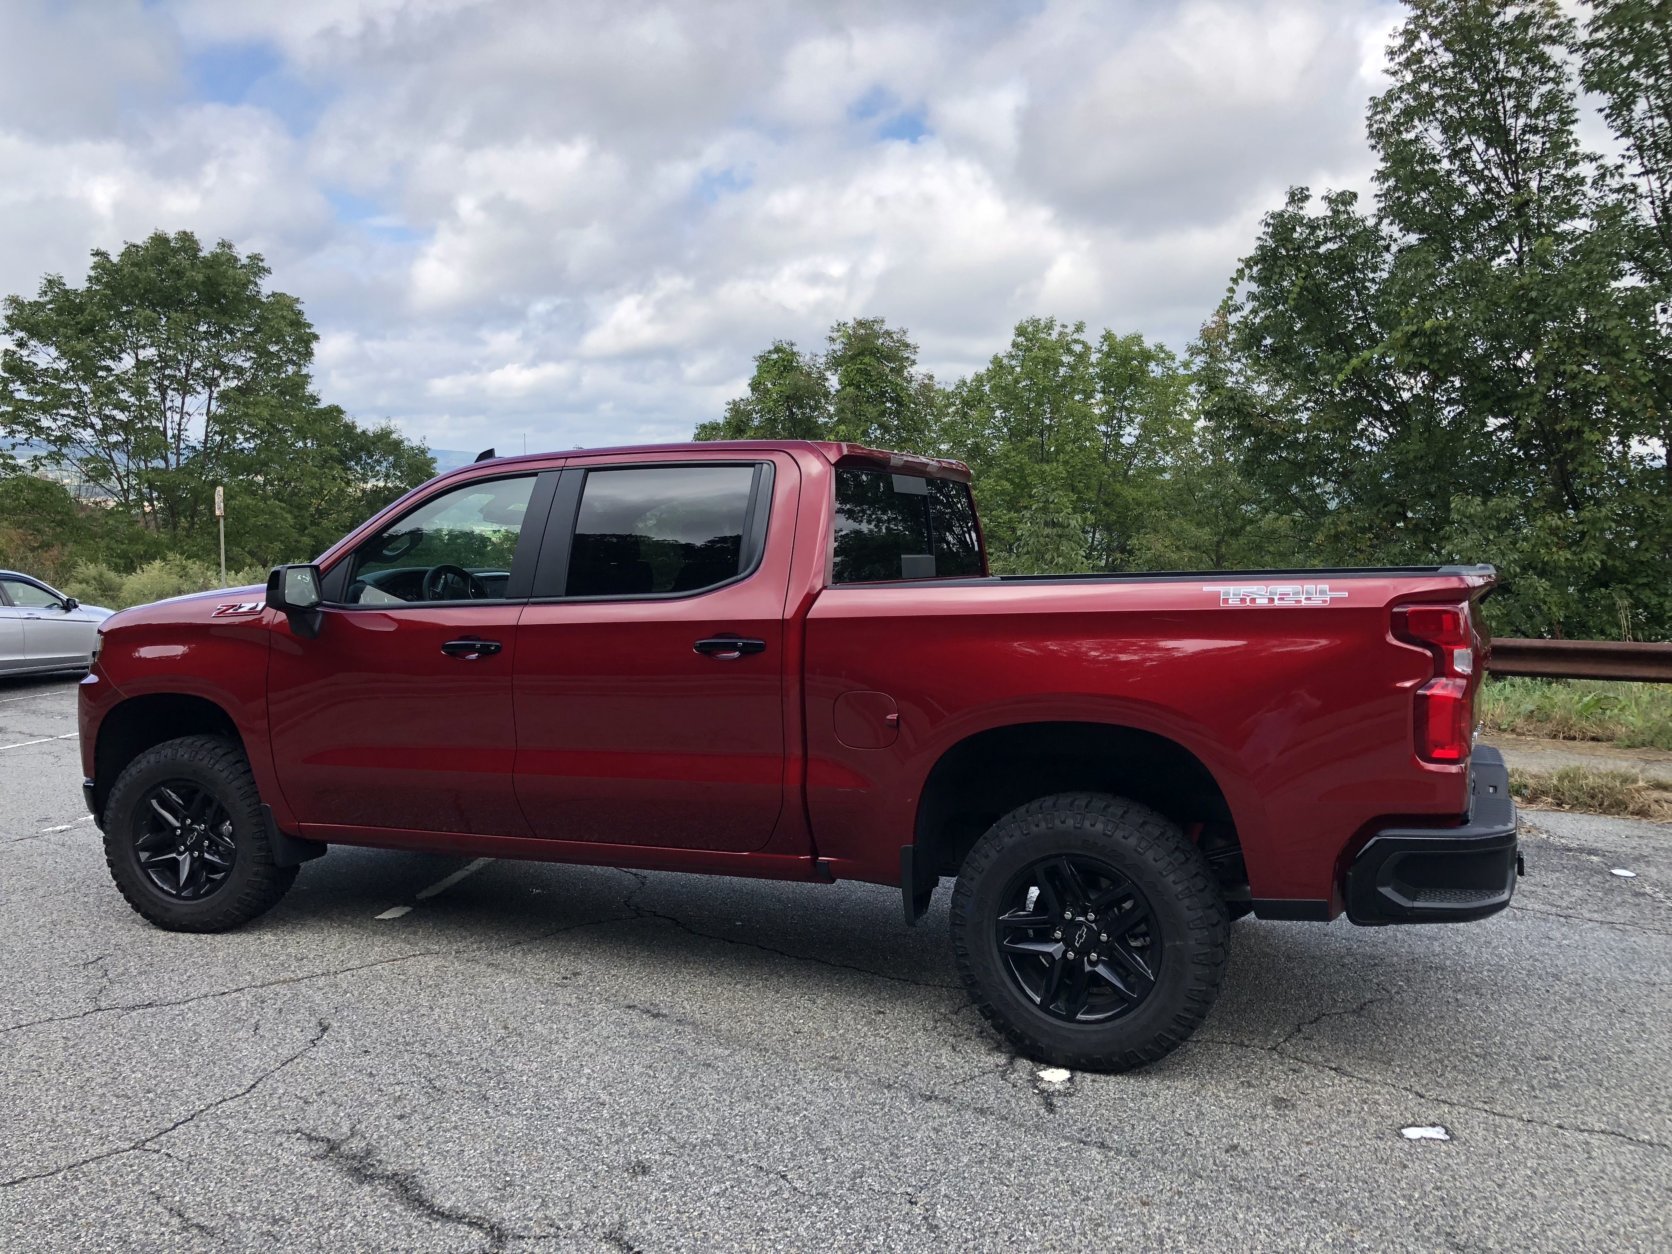 The side of the new Silverado looks beefy with large front and rear flared fenders filled with rugged 18-inch black wheels. (WTOP/Mike Parris)